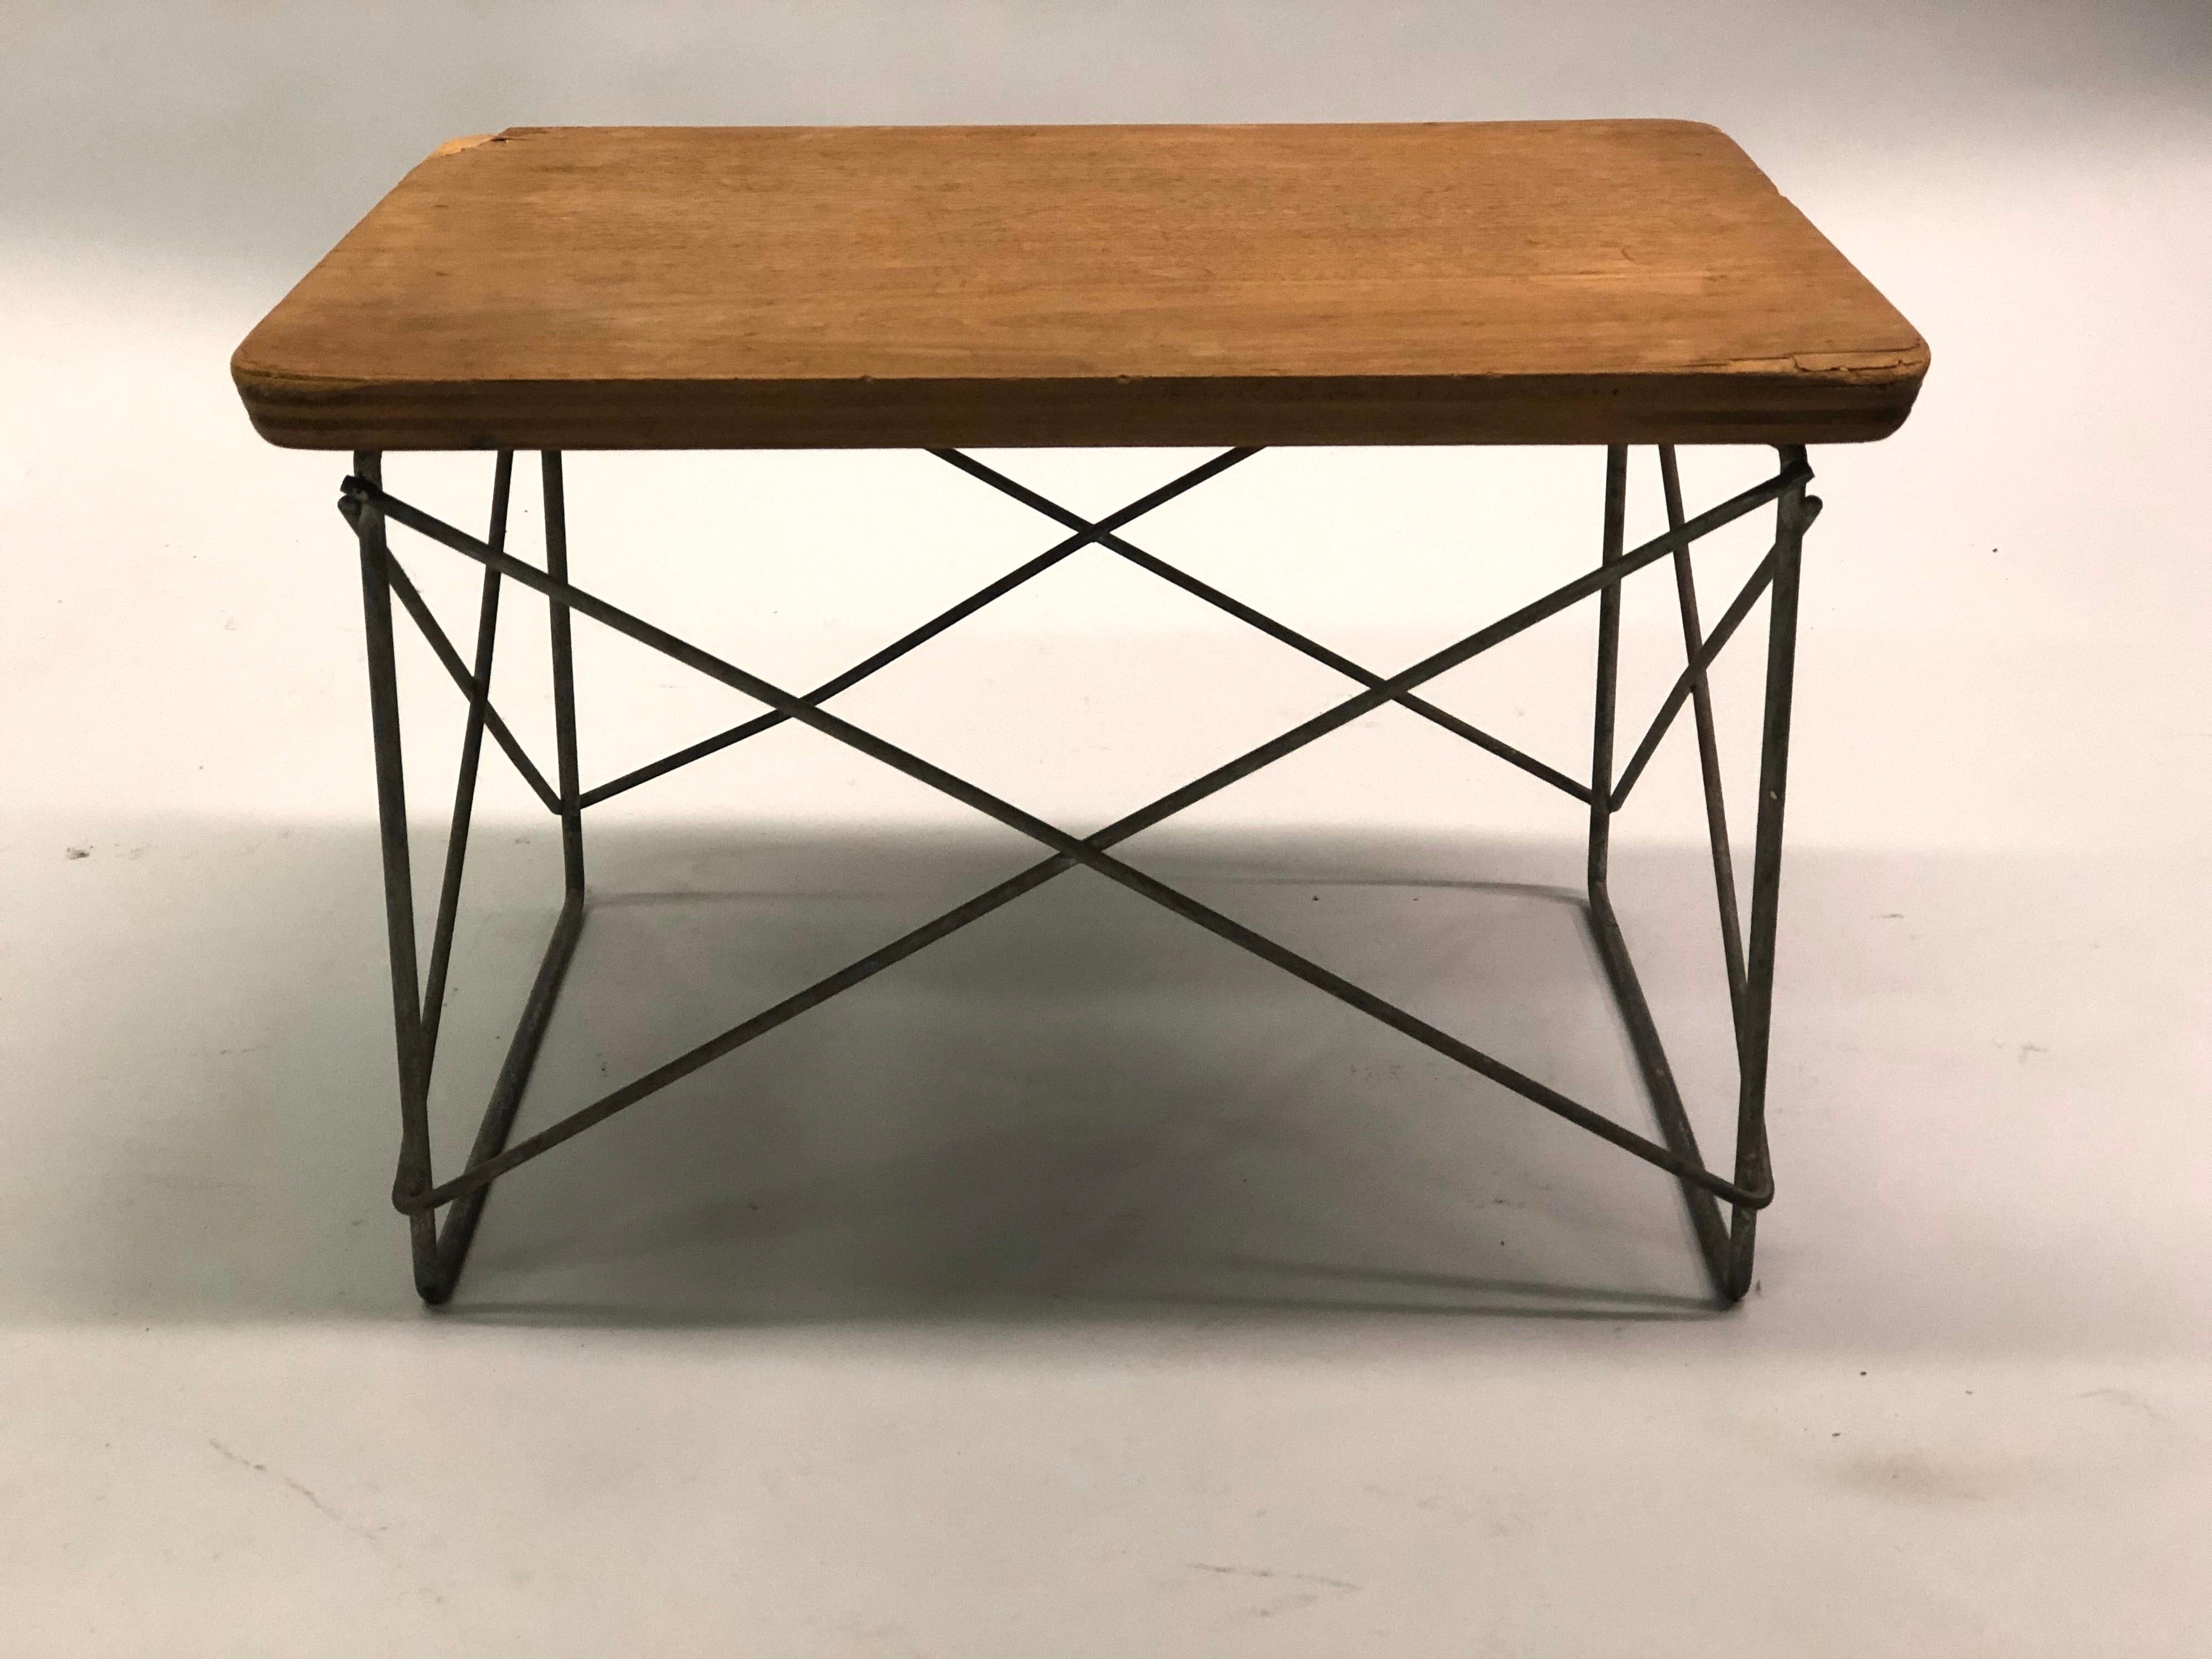 An original and early production multifunctional LTR table, stool or bench by Charles and Ray Eames for Herman Miller composed of a zinc wire frame base and birch plywood top.